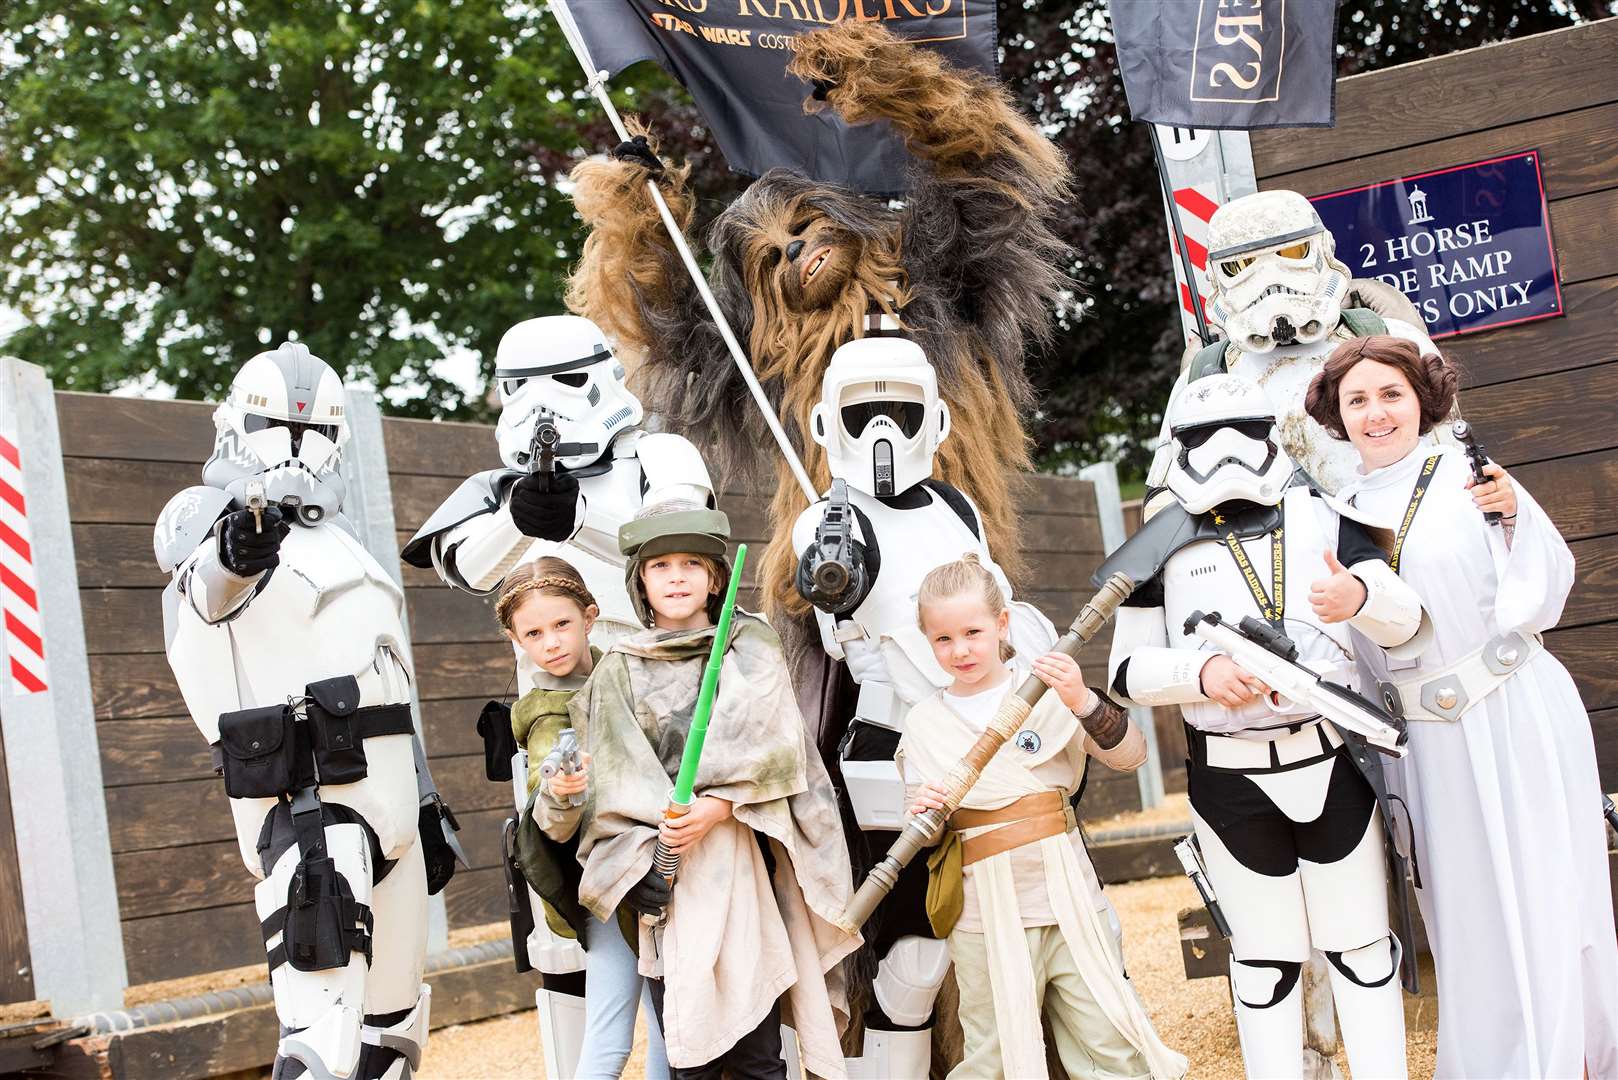 Vader's Raiders, a costume group who portray characters from the Star Wars franchise, will be appearing at the Folkestone Star Wars Weekend. Picture: Mark Westley